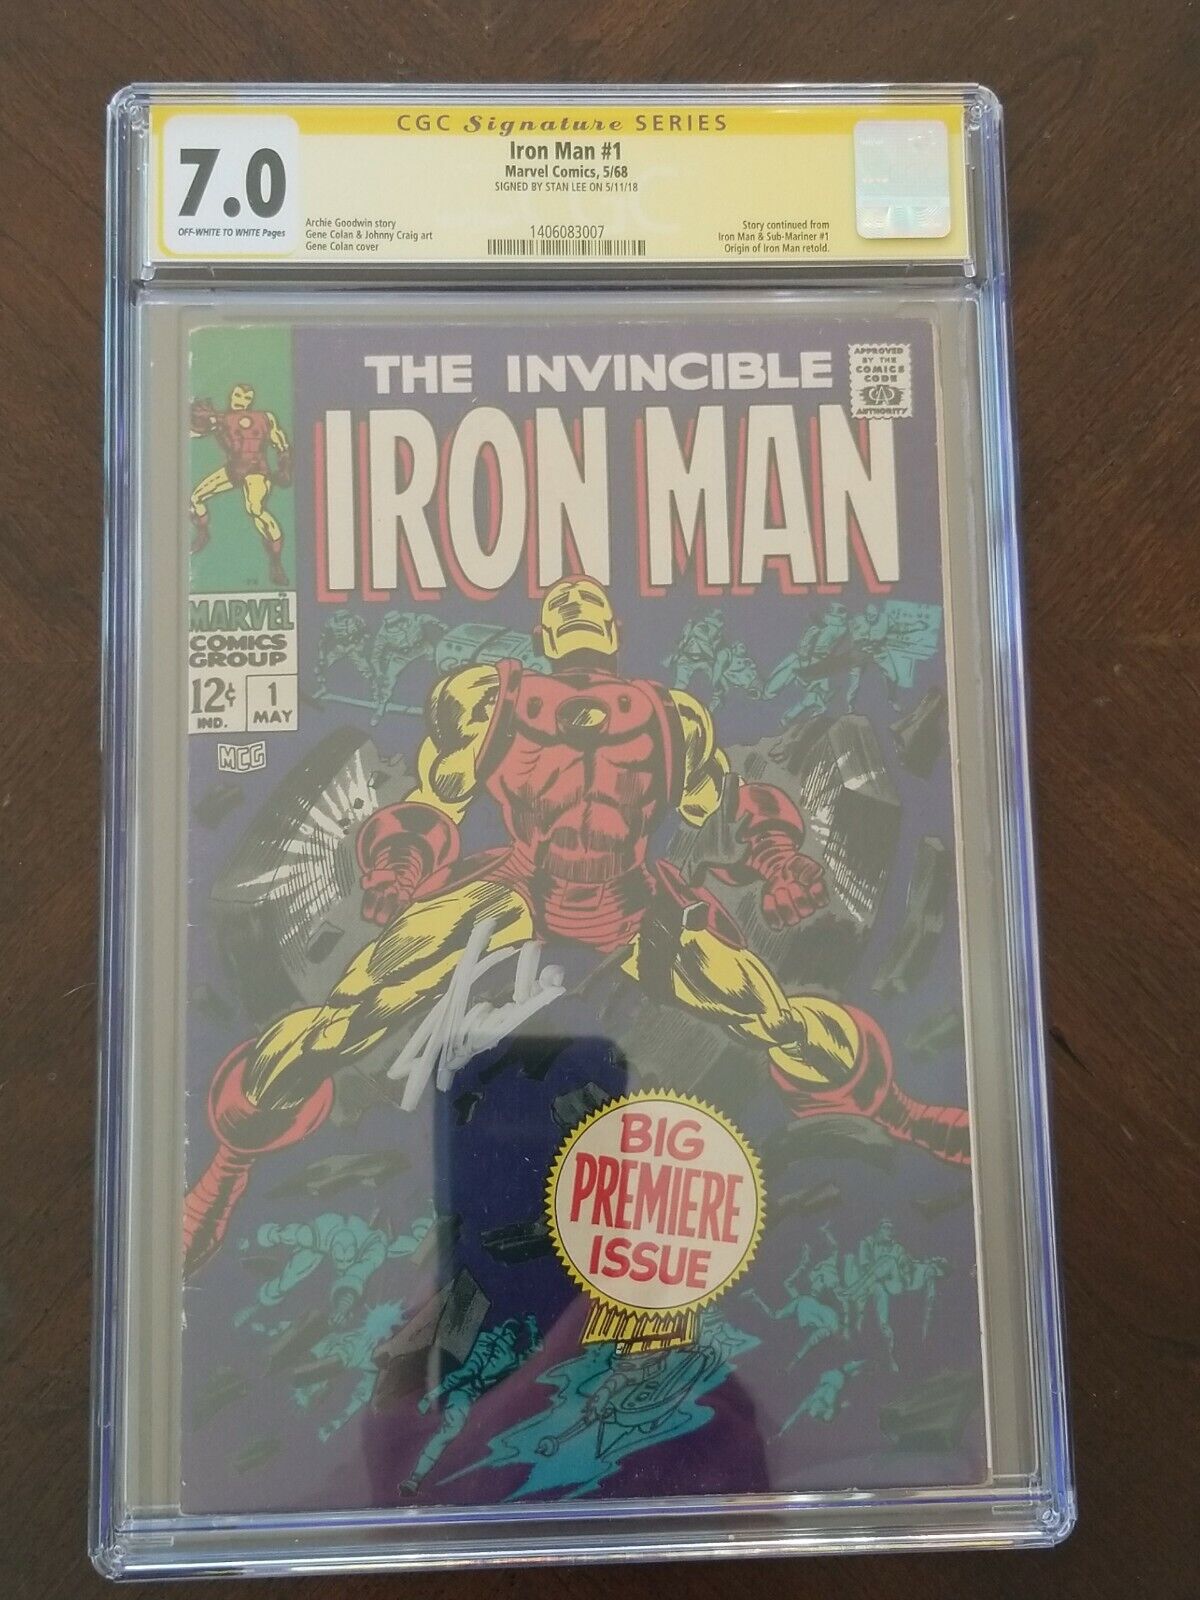 Iron Man #1 (May 1968, Marvel) Signed By Stan Lee. CGC 7.0